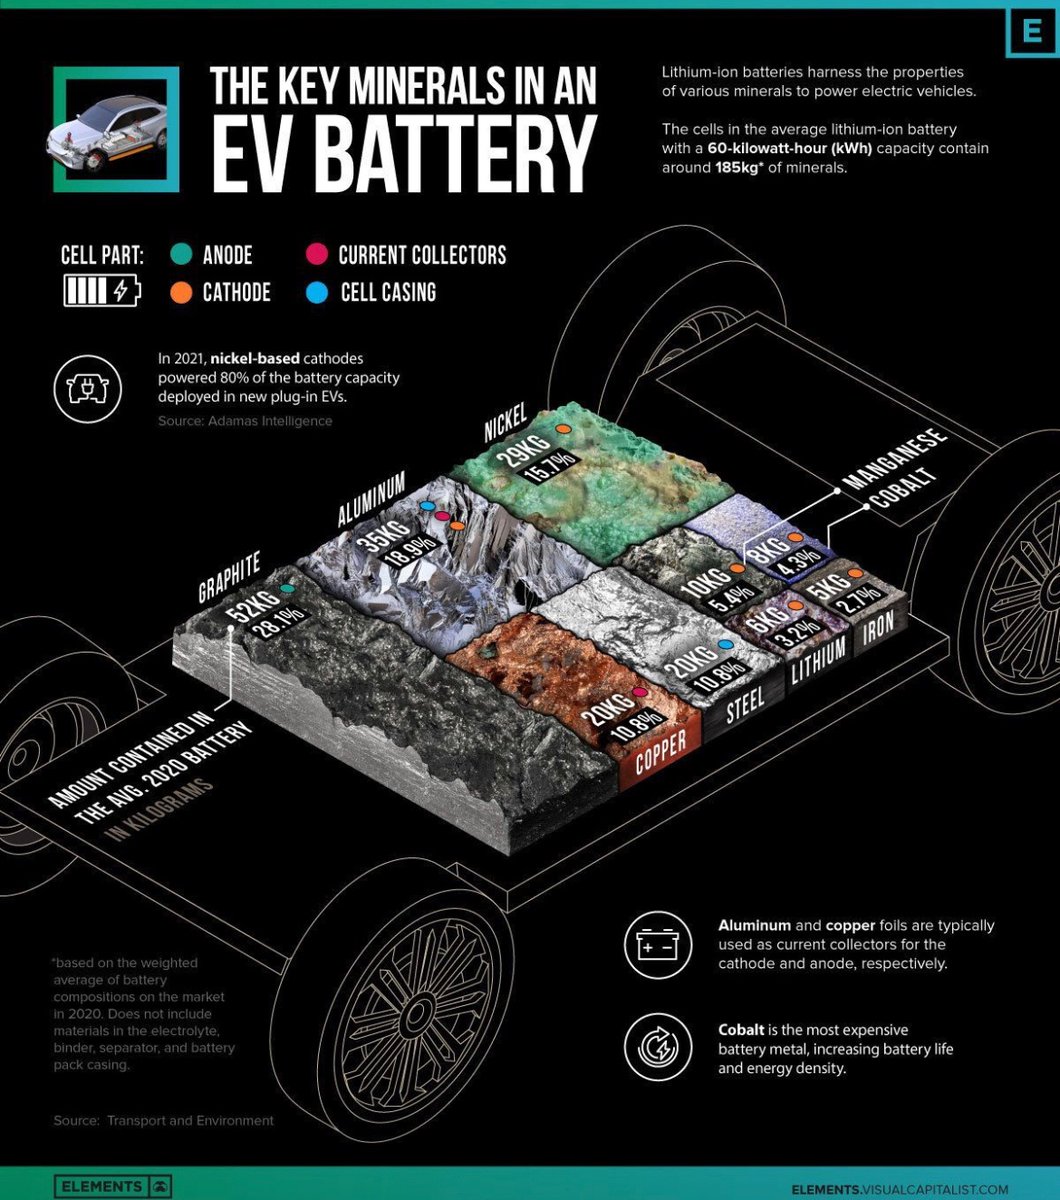 A visual makeup of the EV battery as it stands right now in 2023. How do things look in 2030? #criticalmetals #lithium #cobalt #phosphate #iron #rareeaeth #nickel #copper @PeakAsset1